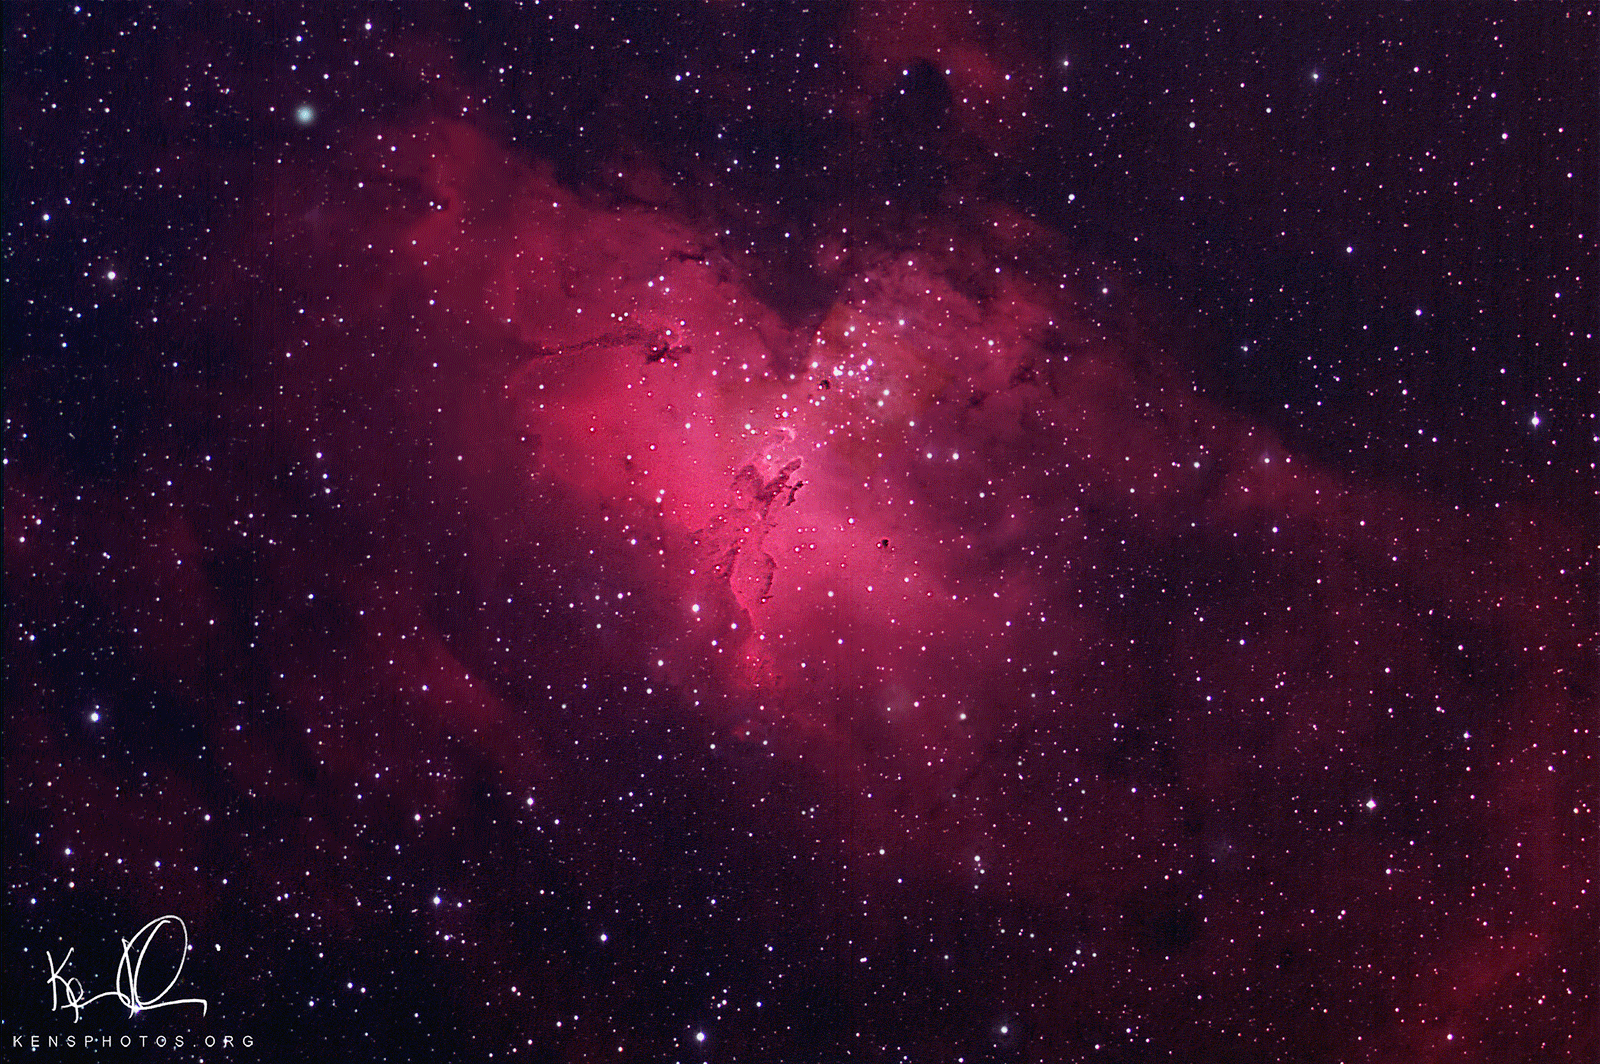   M16.&nbsp;EAGLE NEBULA WITH "PILLARS OF CREATION" AT THE CENTER.                       